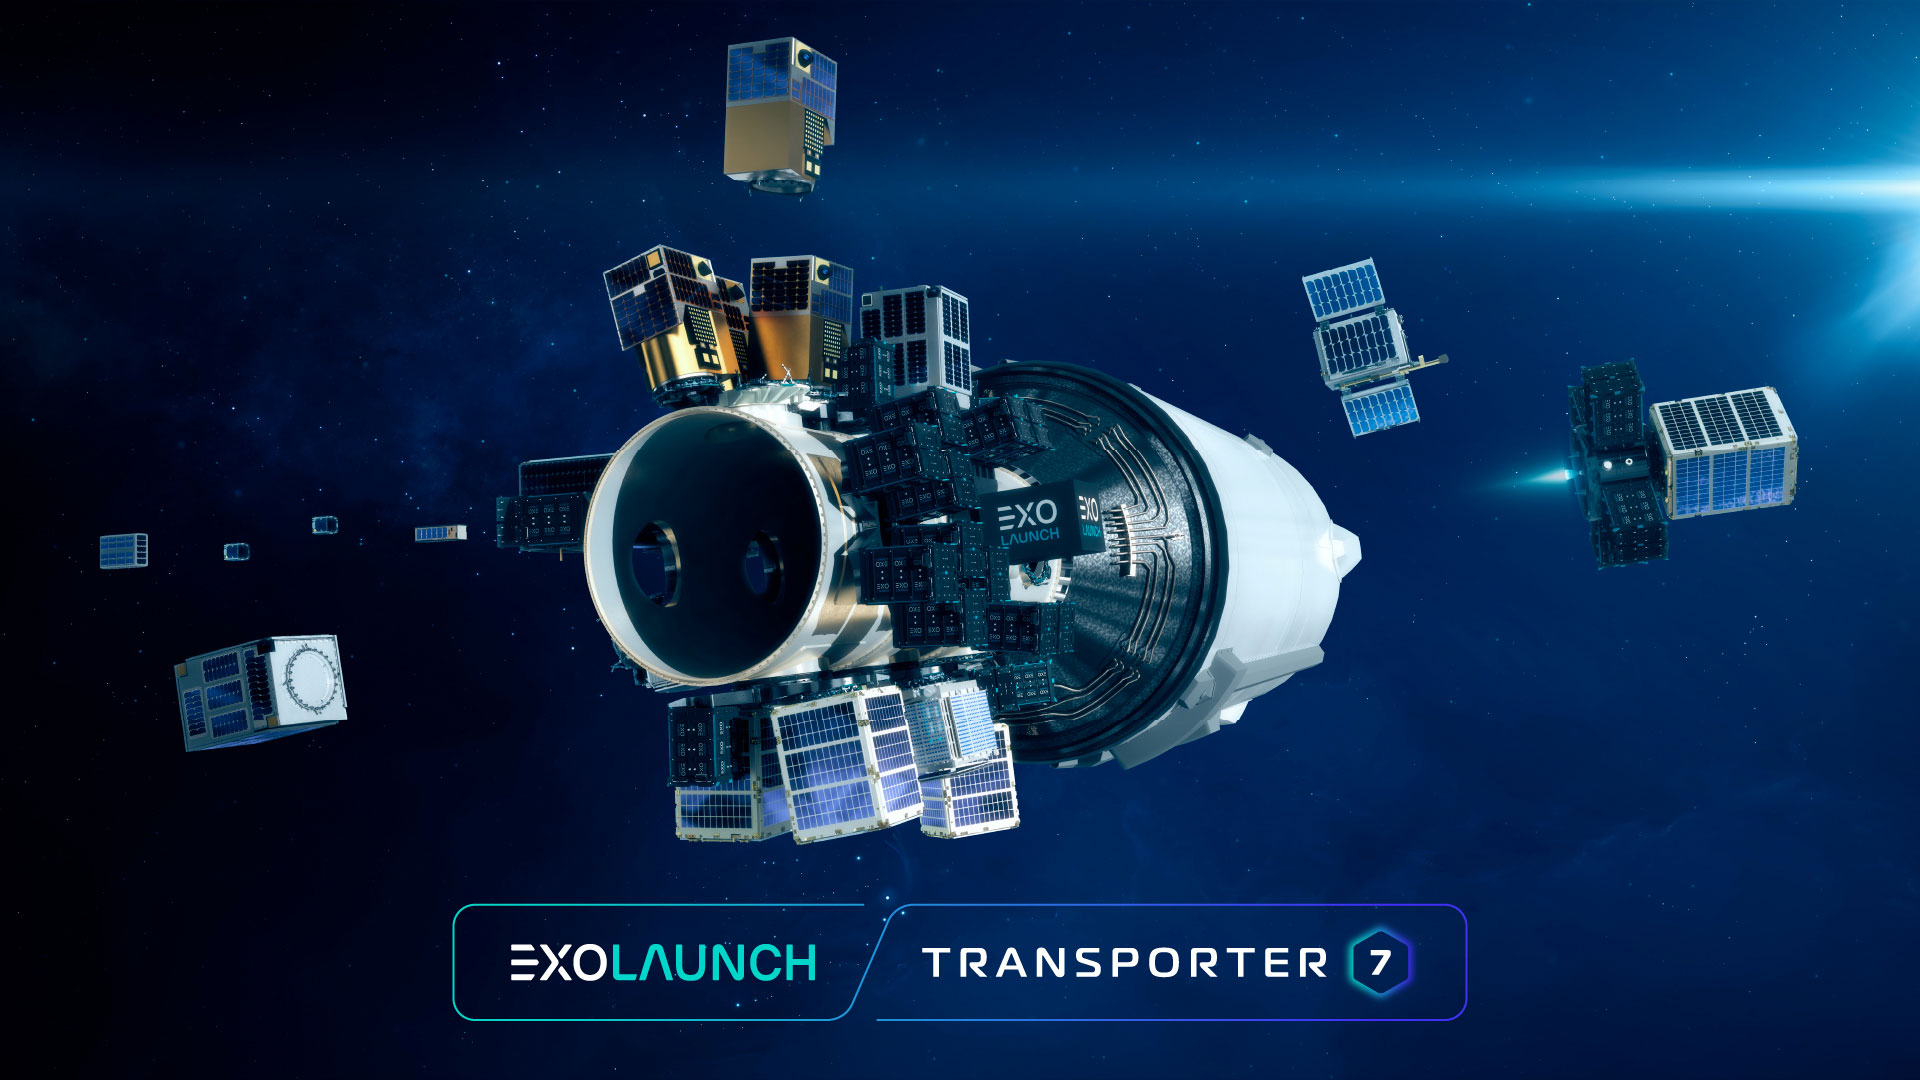 Image of Exolaunch mission 19